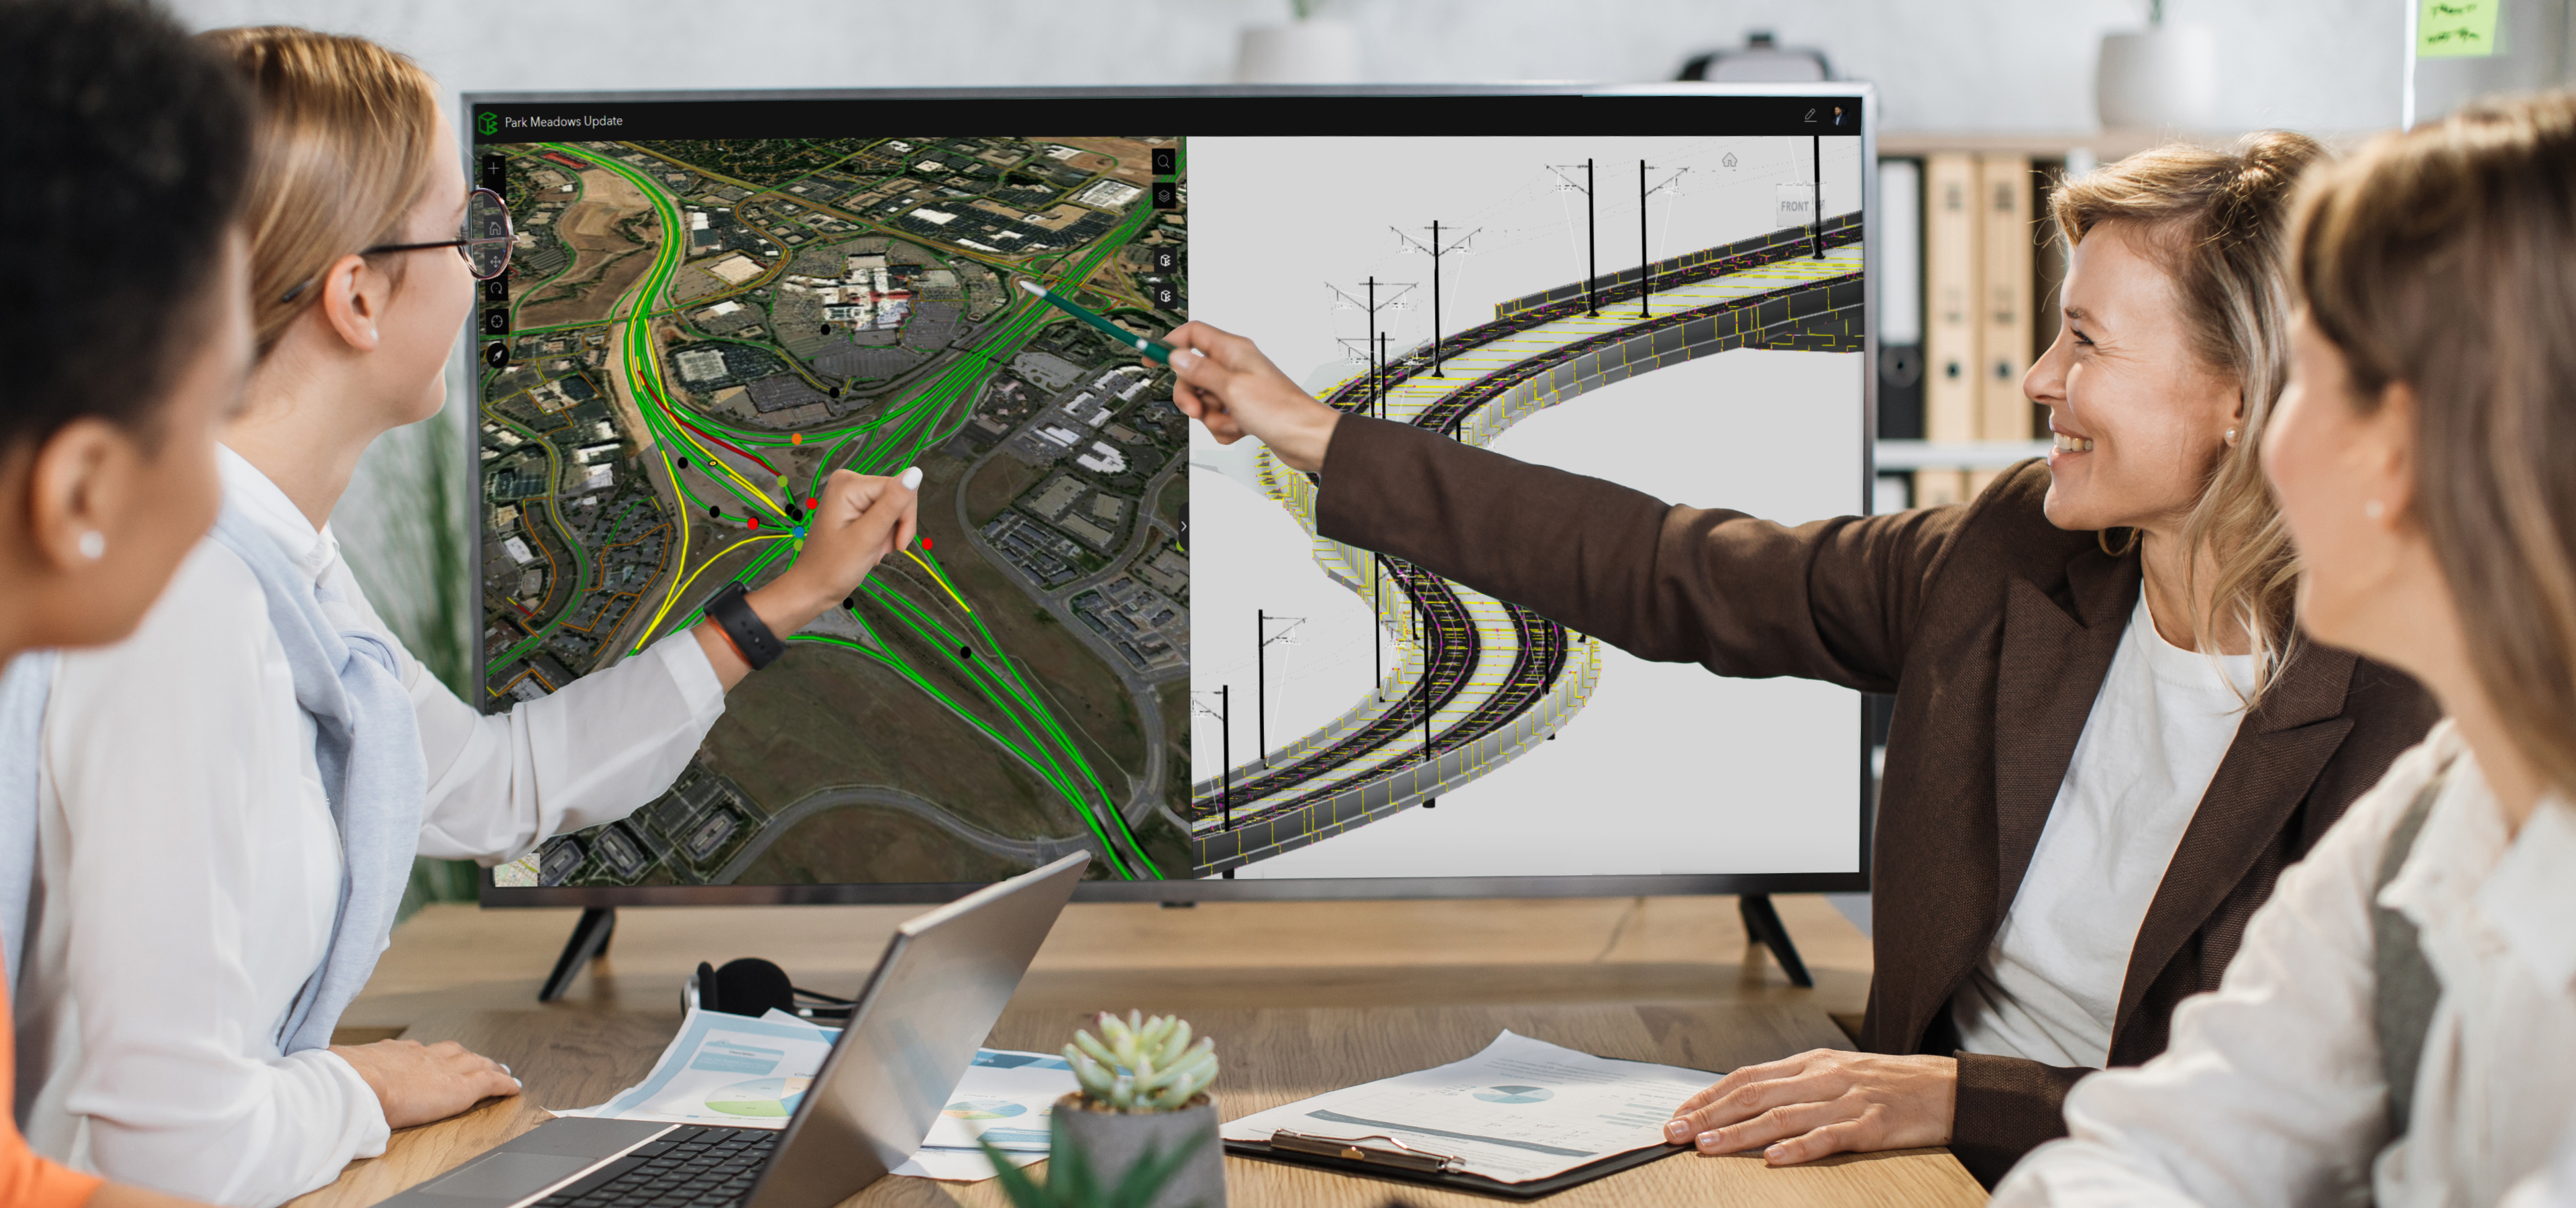 Four people sitting around a table looking at and pointing to a large screen displaying details of an infrastructure project